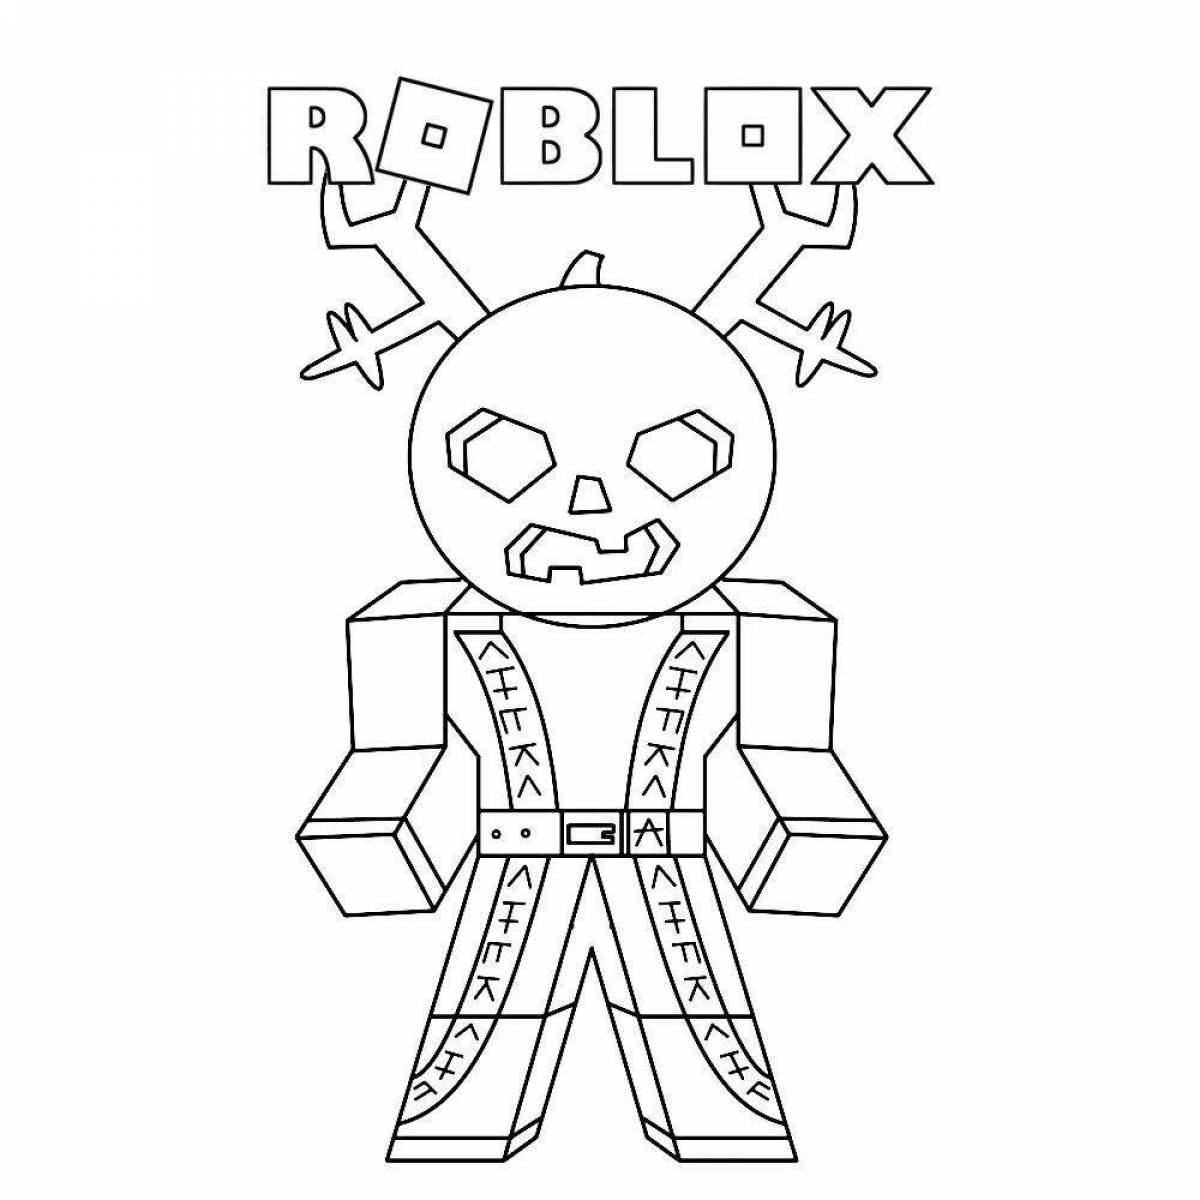 Glowing queen of roblox from tik tok